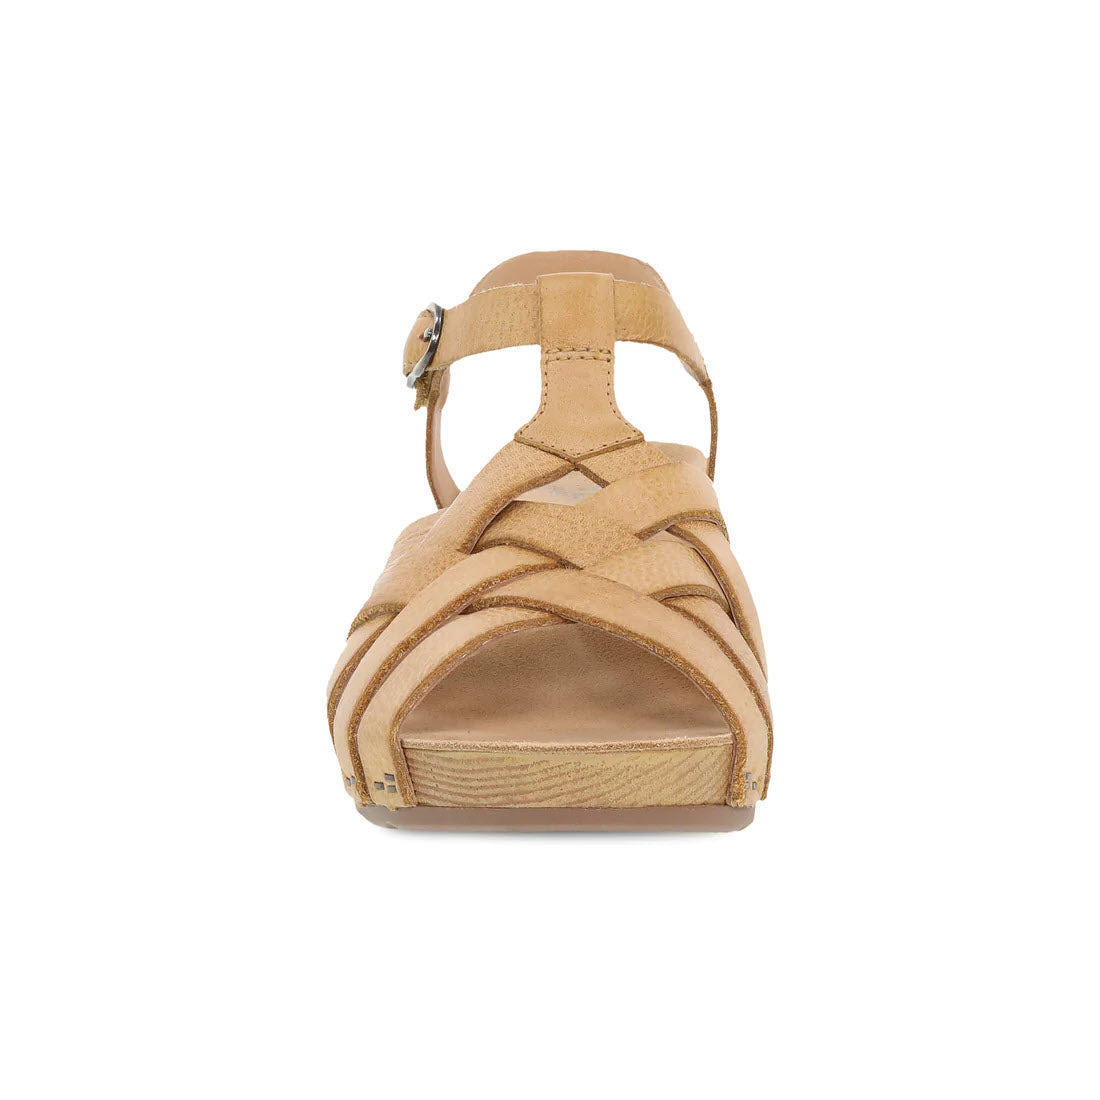 Beige high-heeled sandal with multiple straps and a buckle closure, crafted with woven leather uppers, shown from the front view on a white background. - DANSKO TINLEY TAN - WOMENS by Dansko